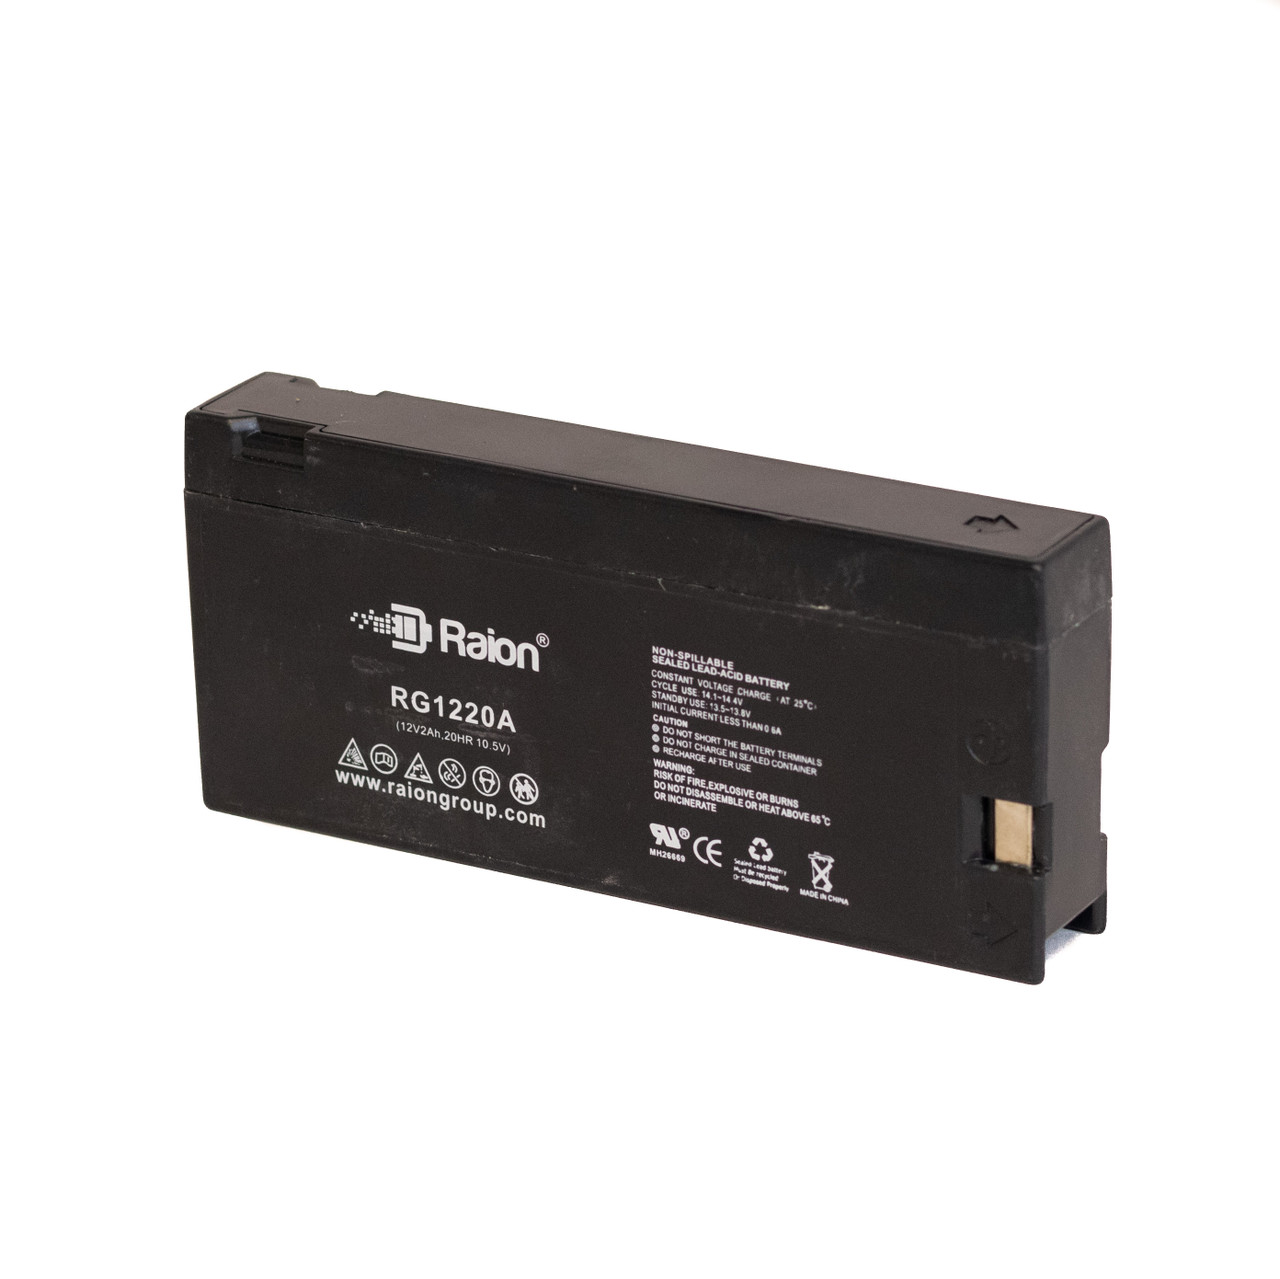 Raion Power RG1220A Replacement Battery for JC Penney 855-8462